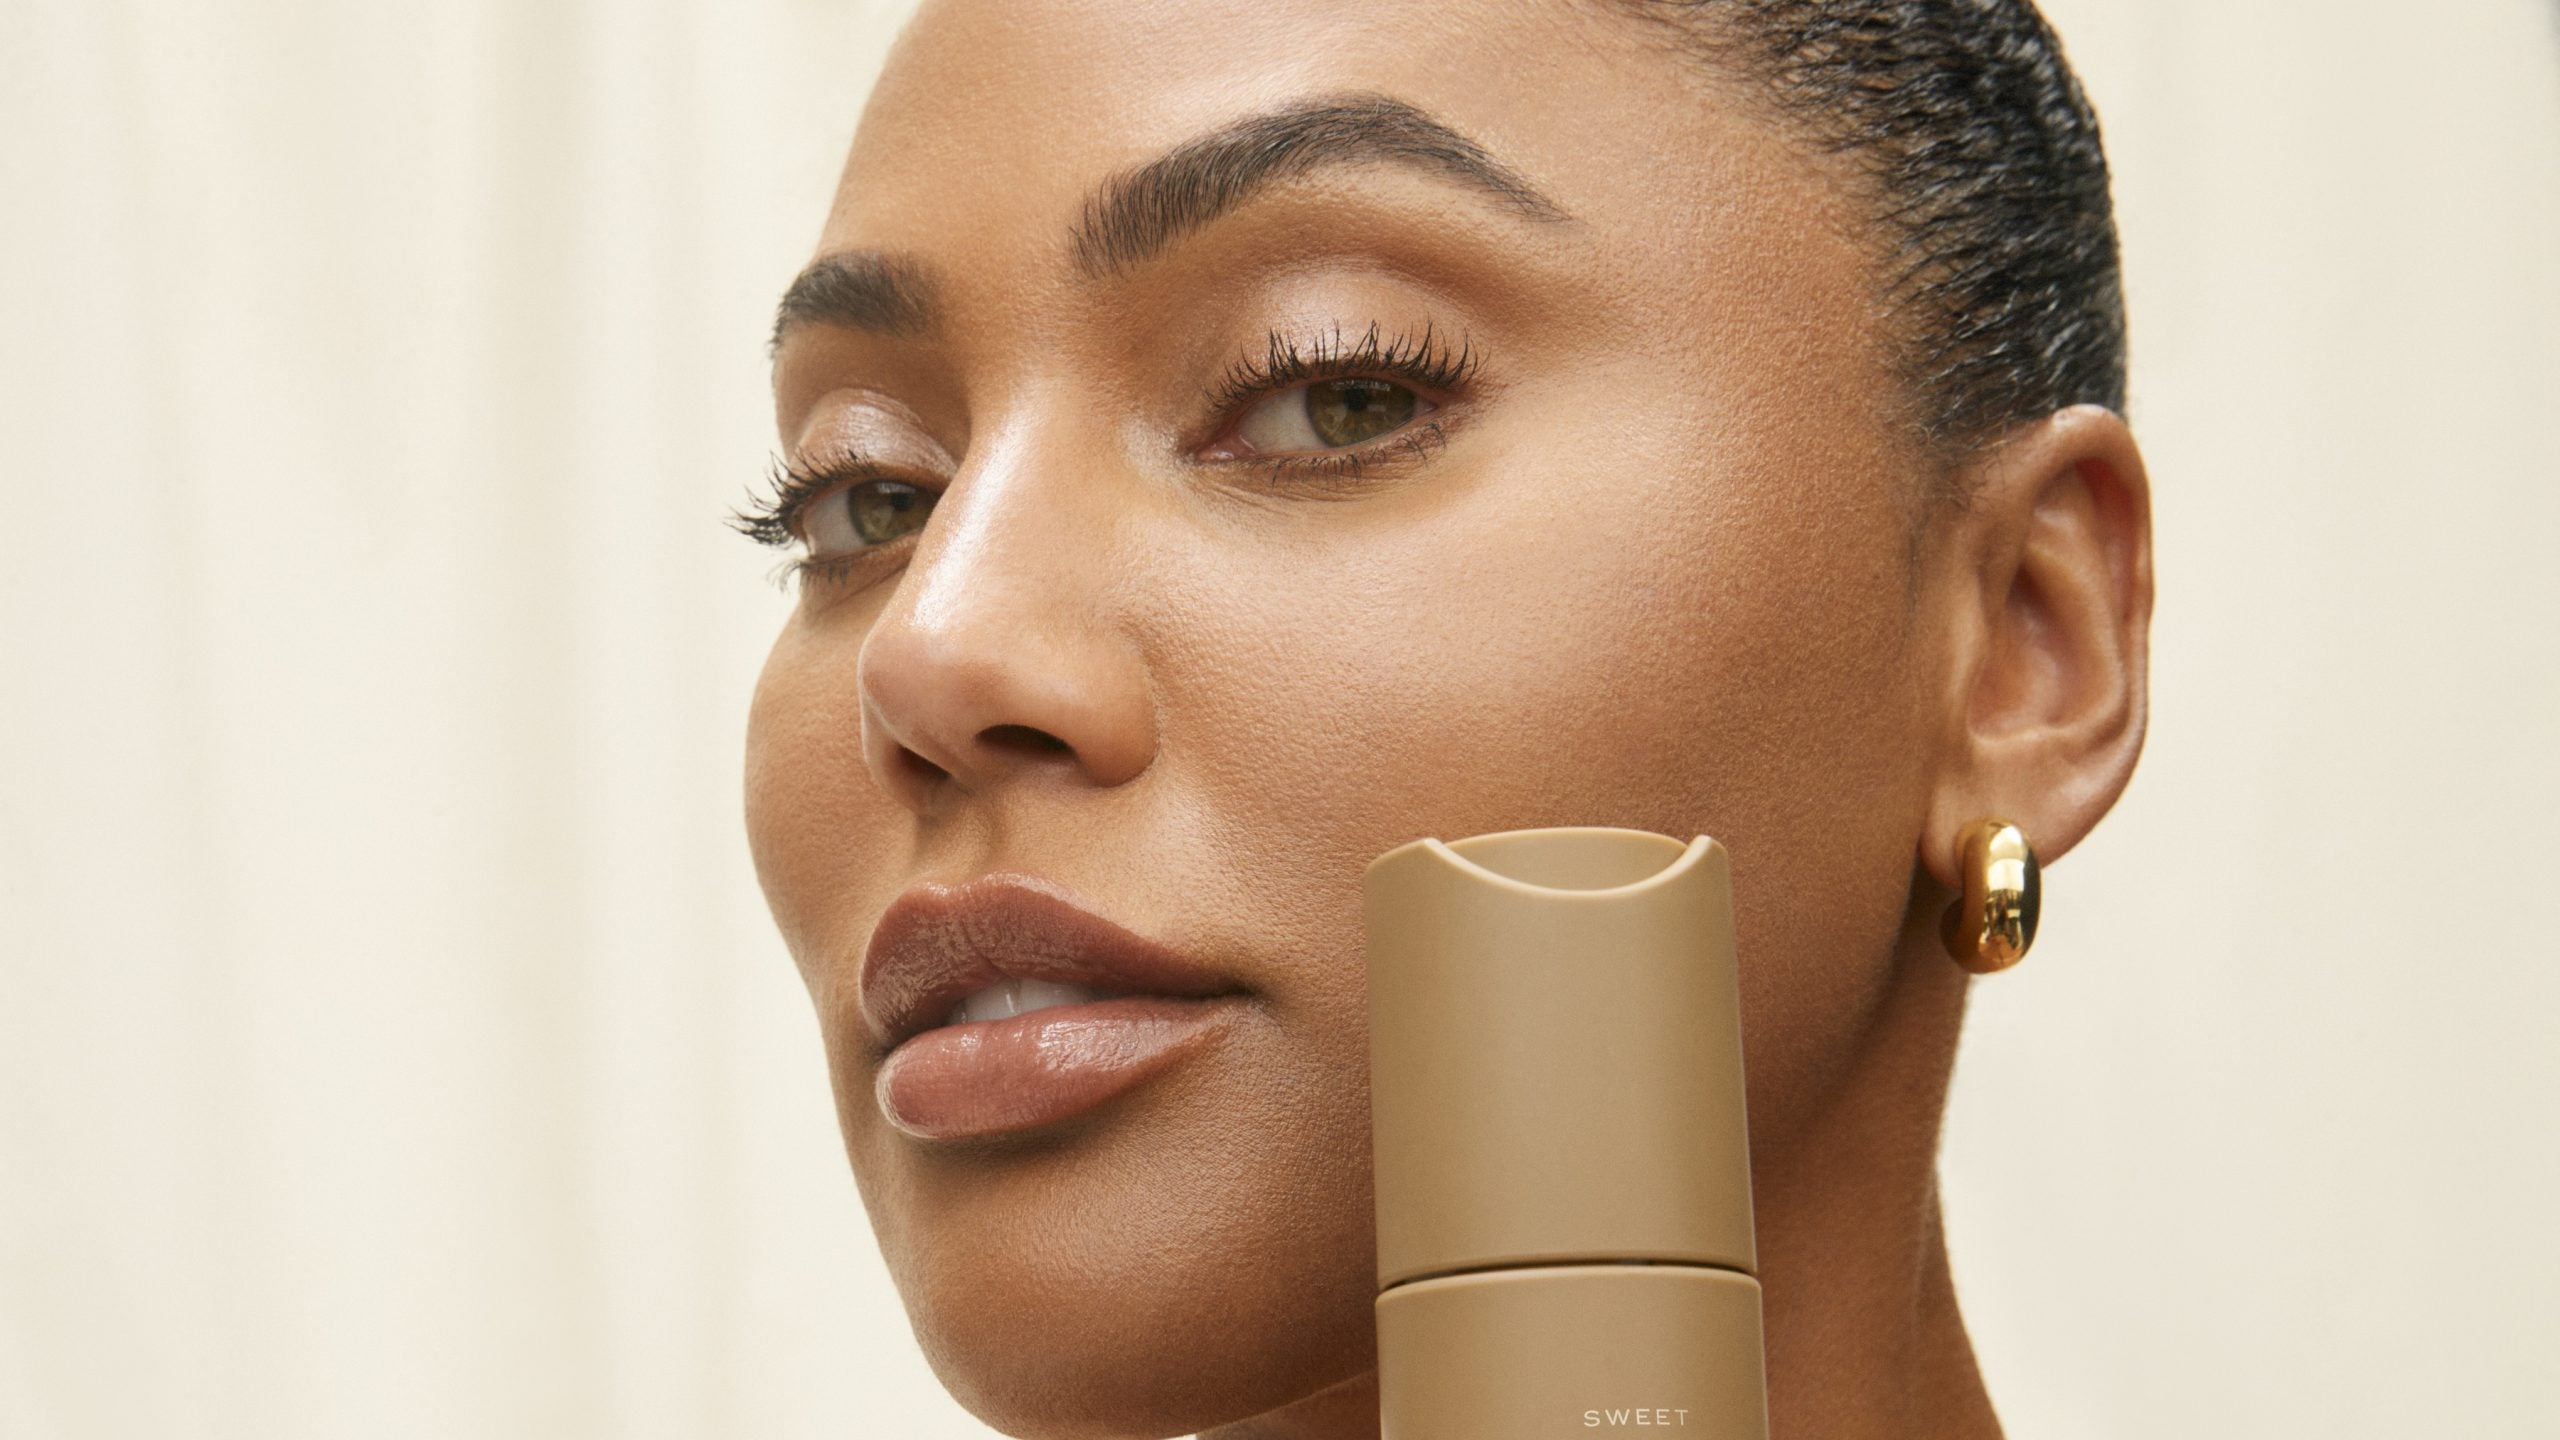 EXCLUSIVE: Ayesha Curry’s Sweet July Skin Launches New Castaway Cream